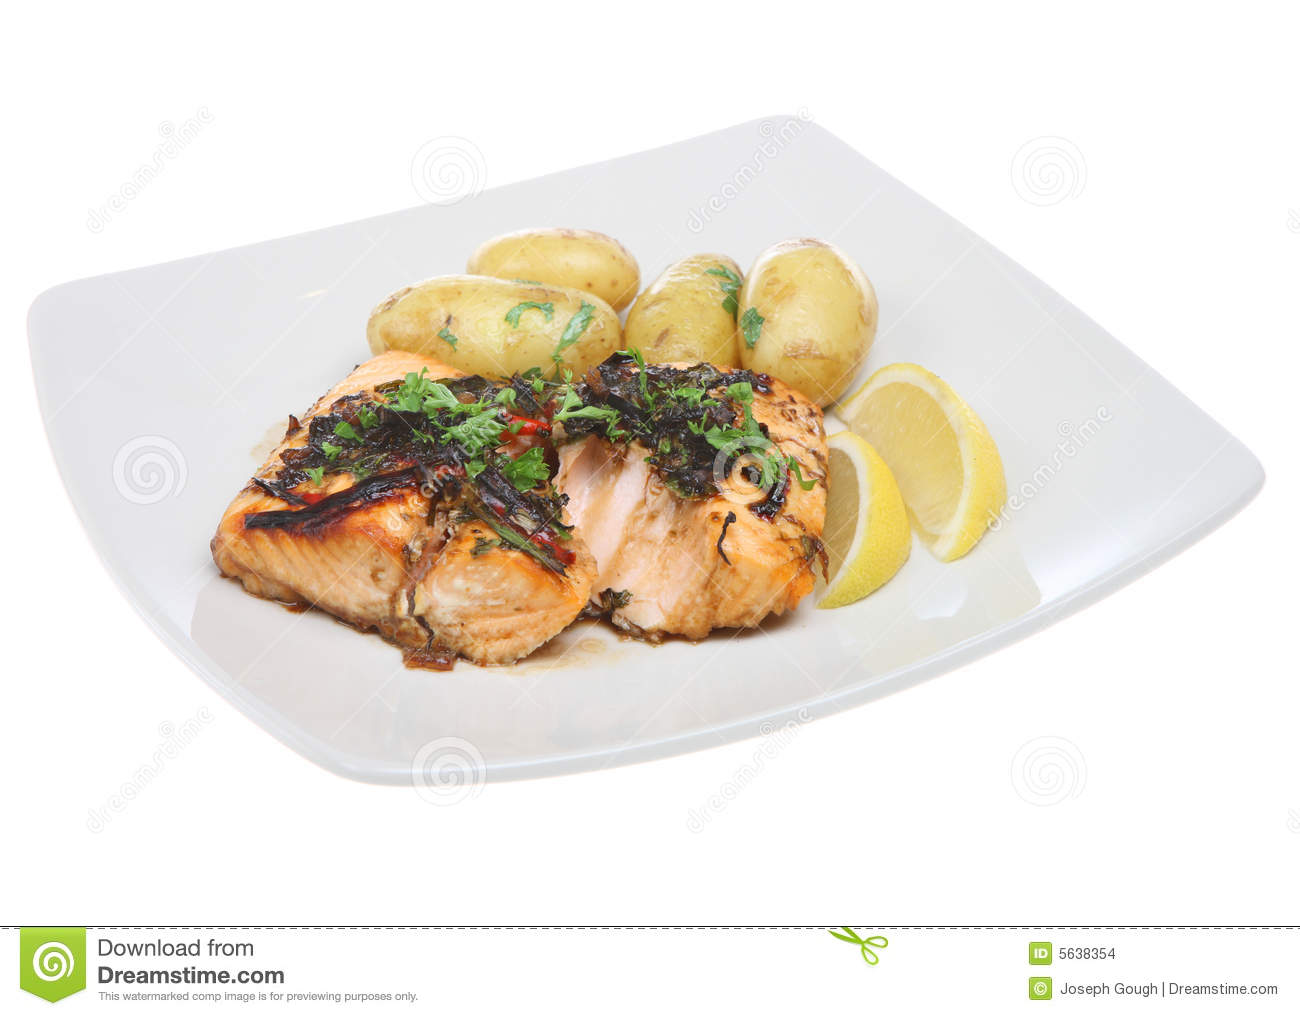 Baked Salmon With Herbs New Potatoes And Lemon Wedges 